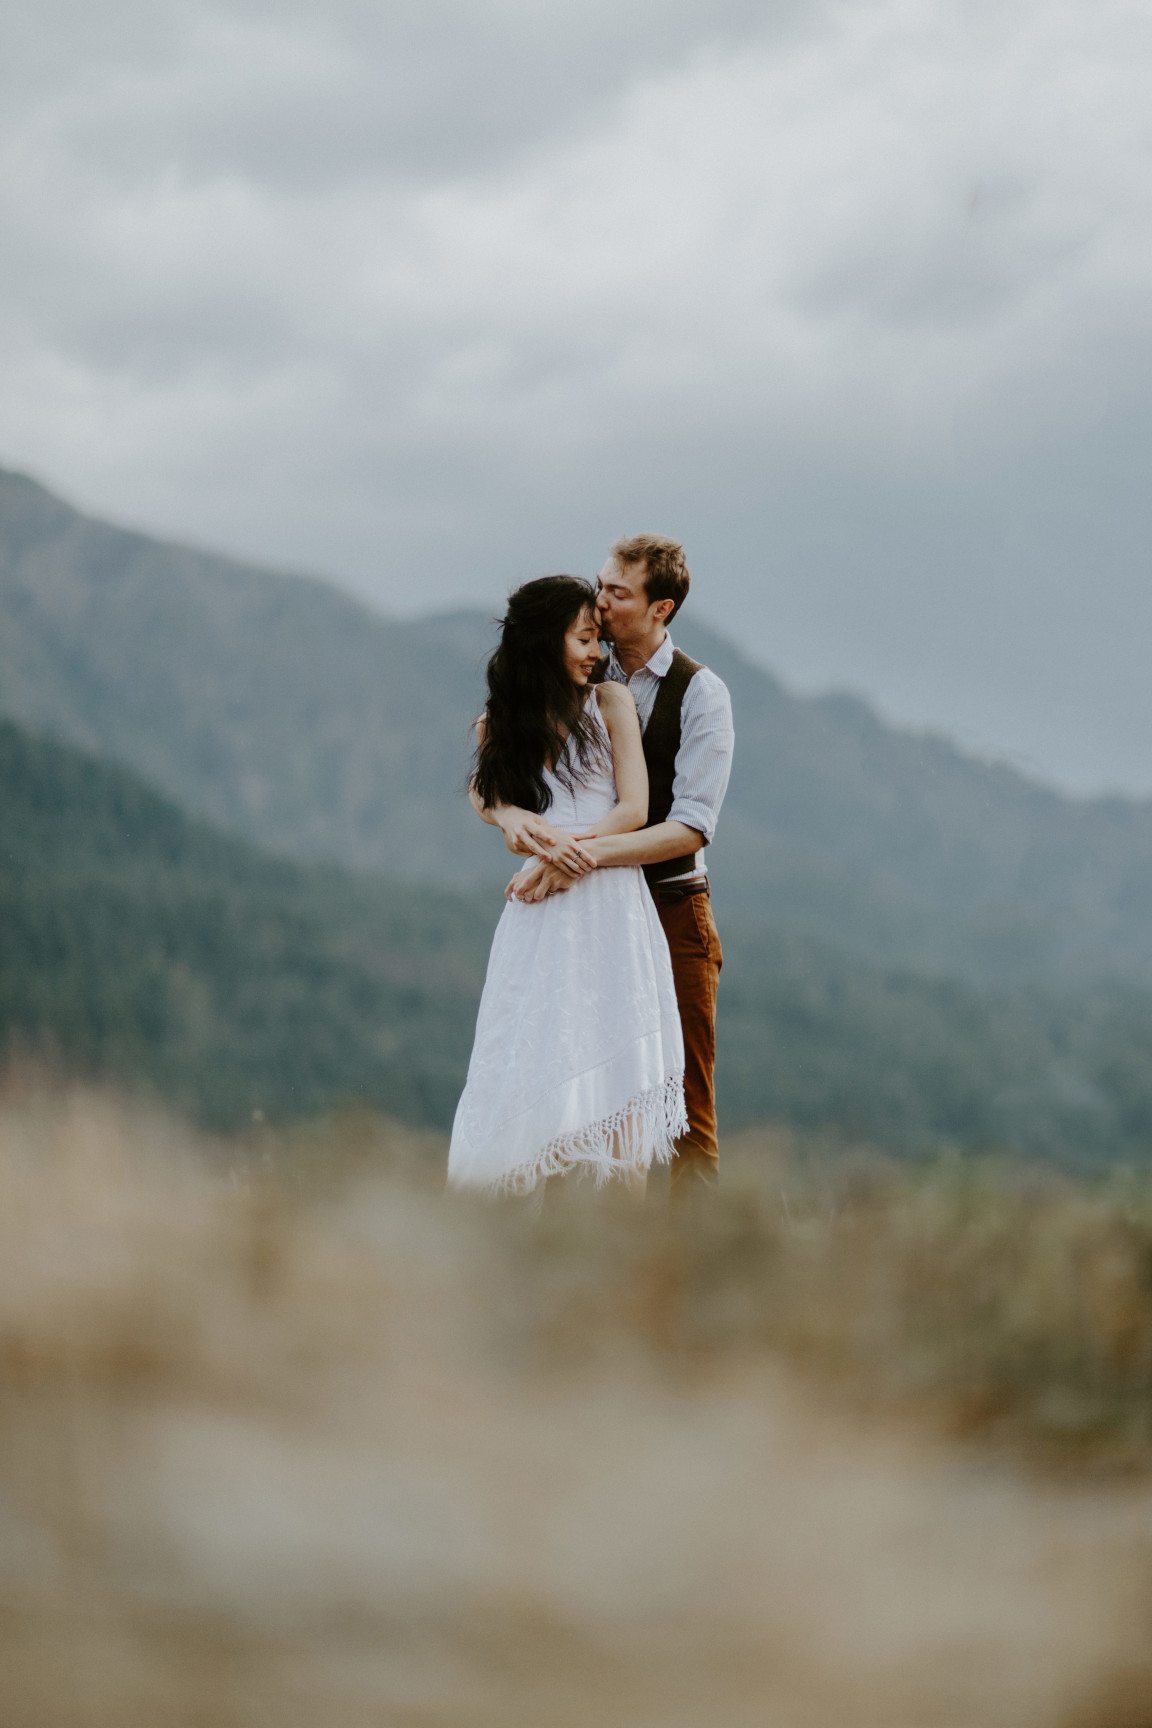 Kimberlie and Jacob share a moment at Cascade Locks. Elopement wedding photography at Cascade Locks by Sienna Plus Josh.